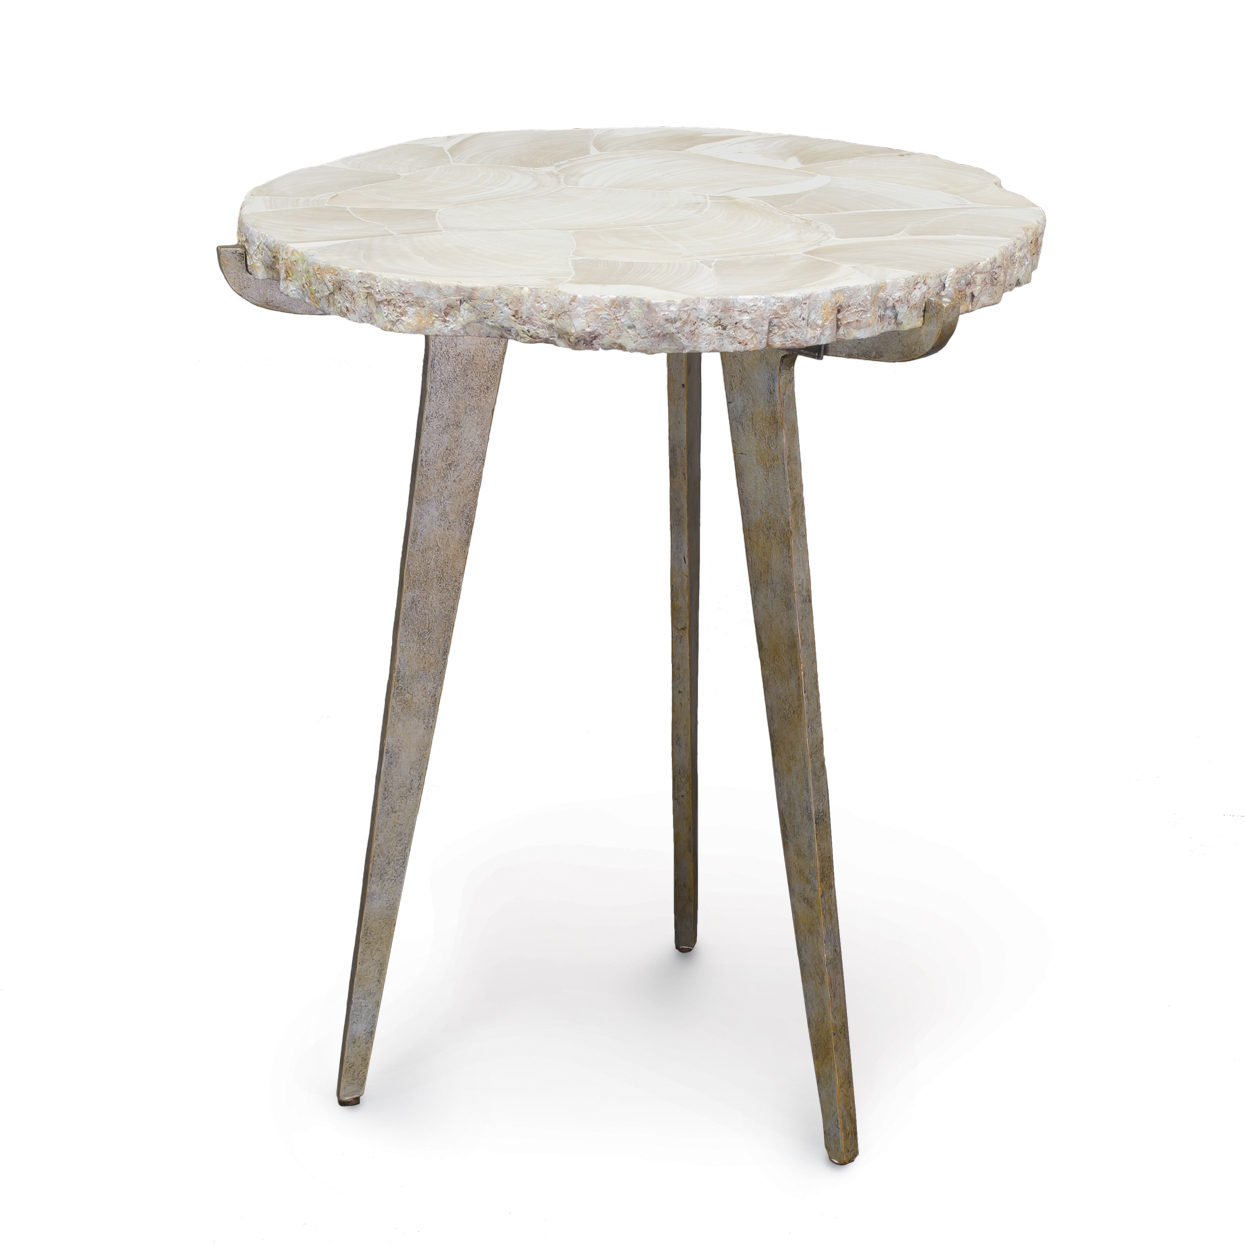 Fossilized Clam Table-$1,158.00